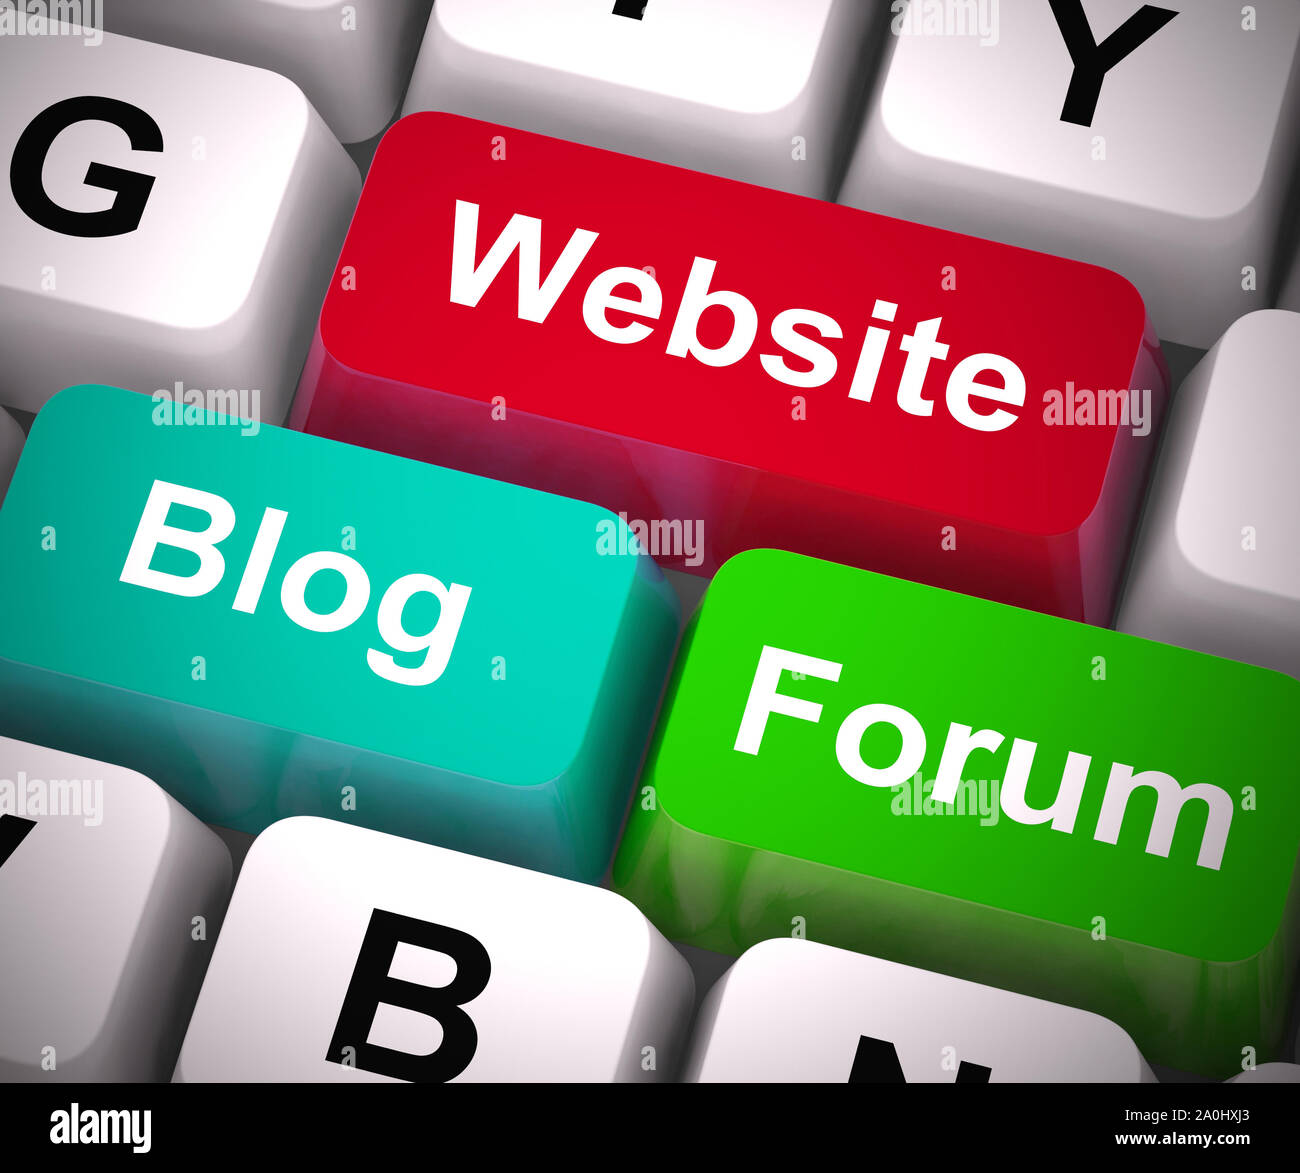 Website blog or forum the choice of promoting products on the internet. Publishing information using microblogging or sites - 3d illustration Stock Photo